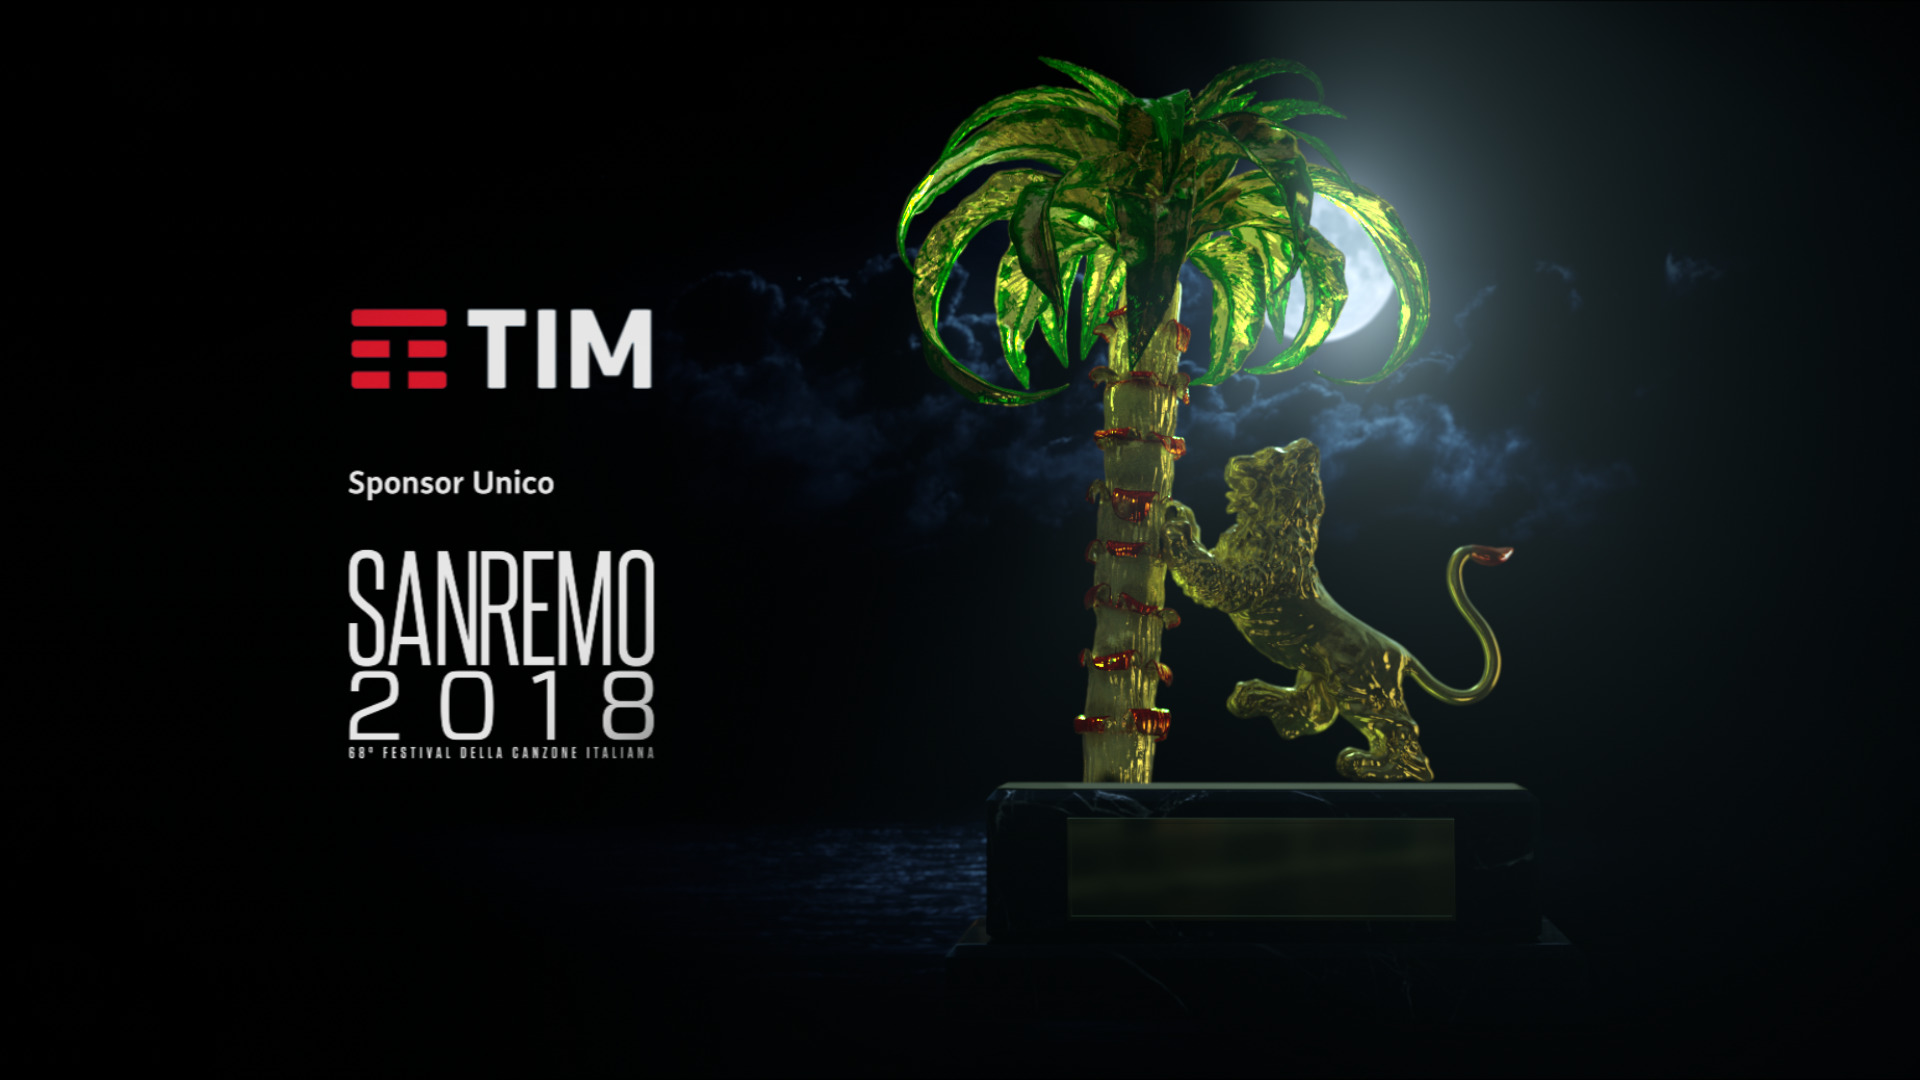 The Sanremo prize comes to life with TIM and EDI Italian digital effects